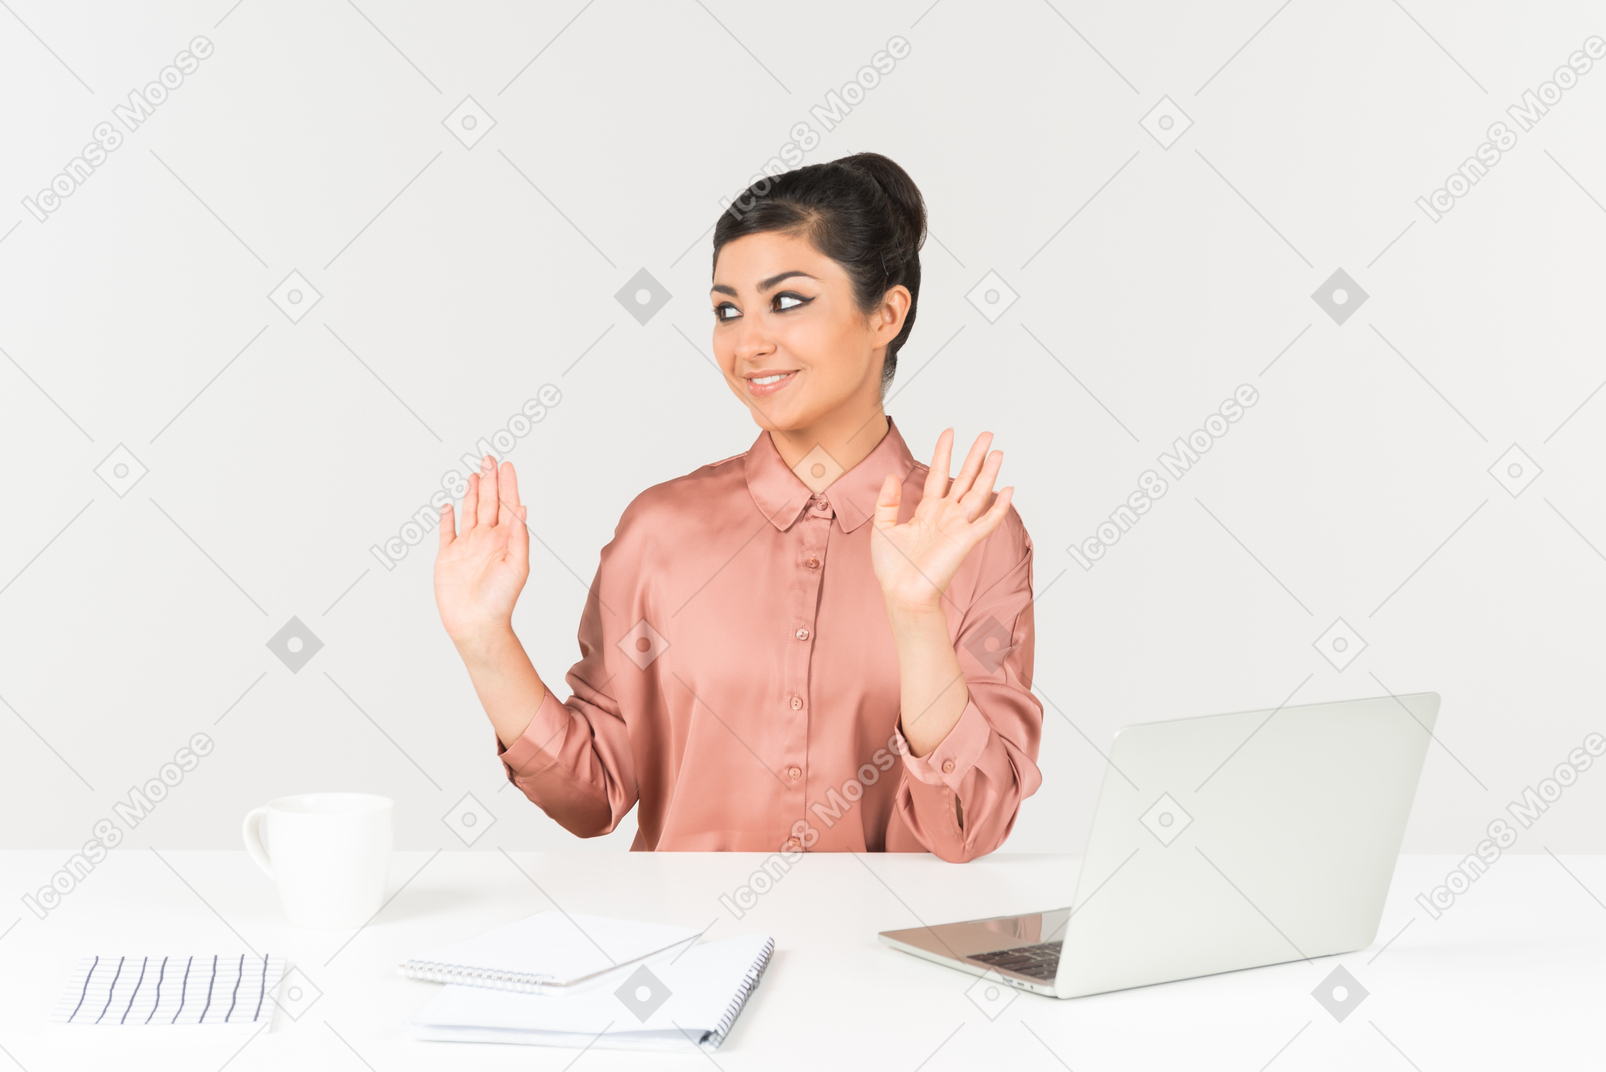 Young indian female office worker sitting at office desk with hands up